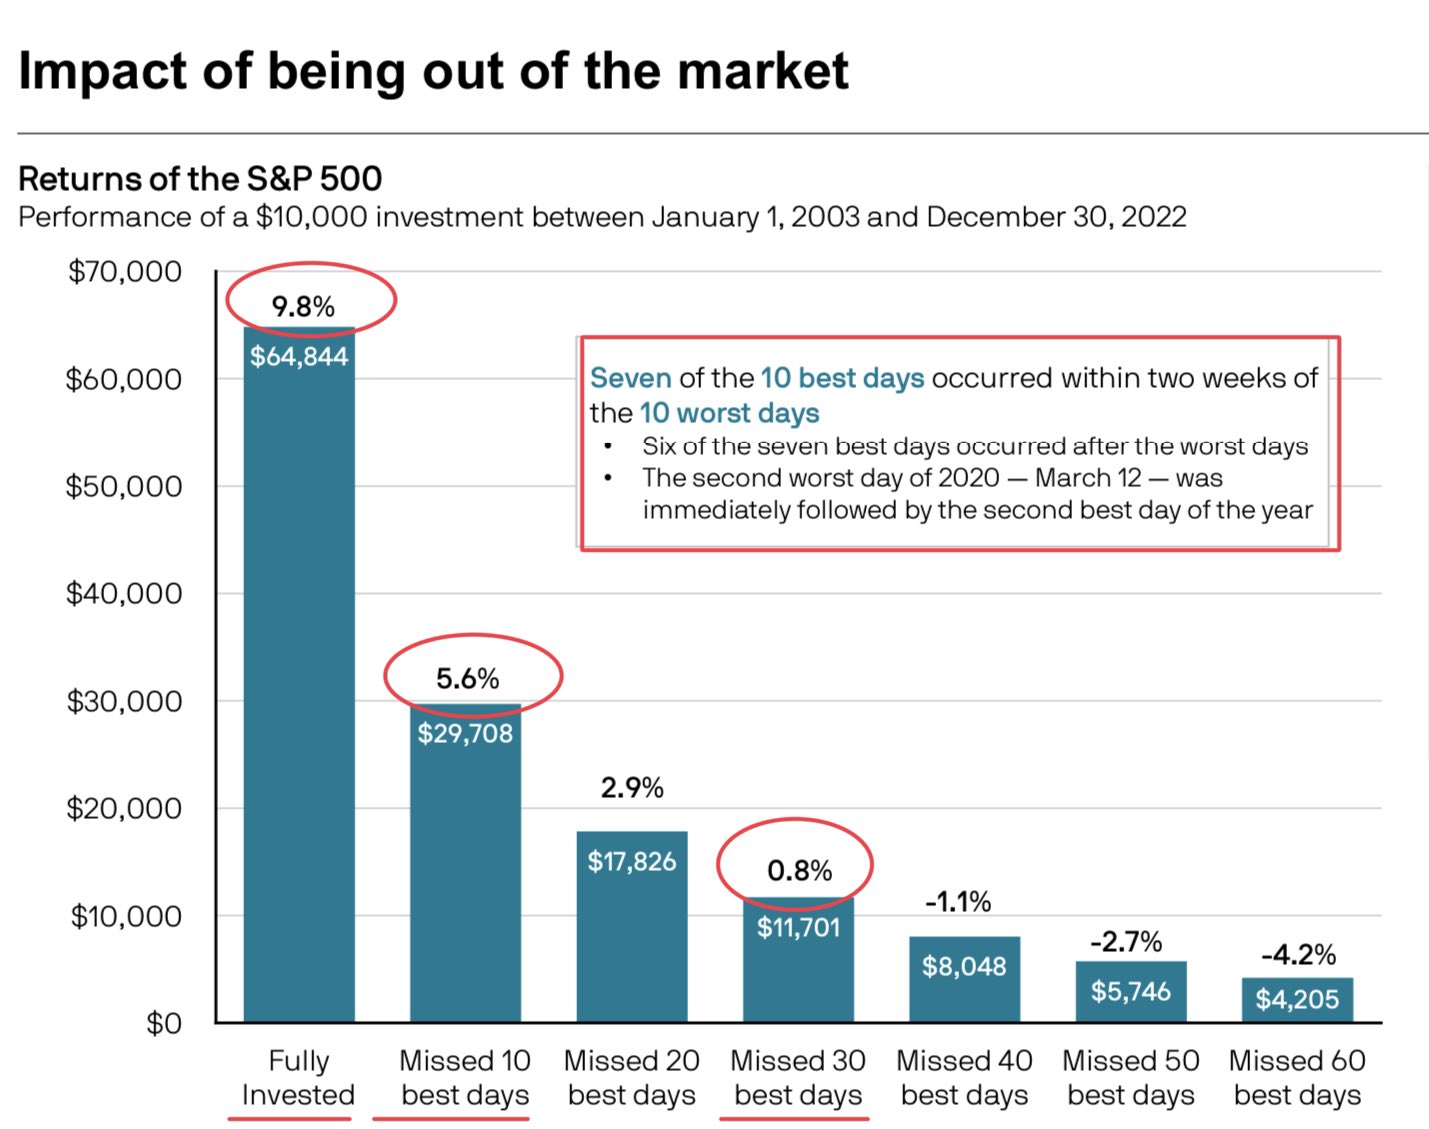 Impact on S&P 500 returns being out of the market - re-retire wisely